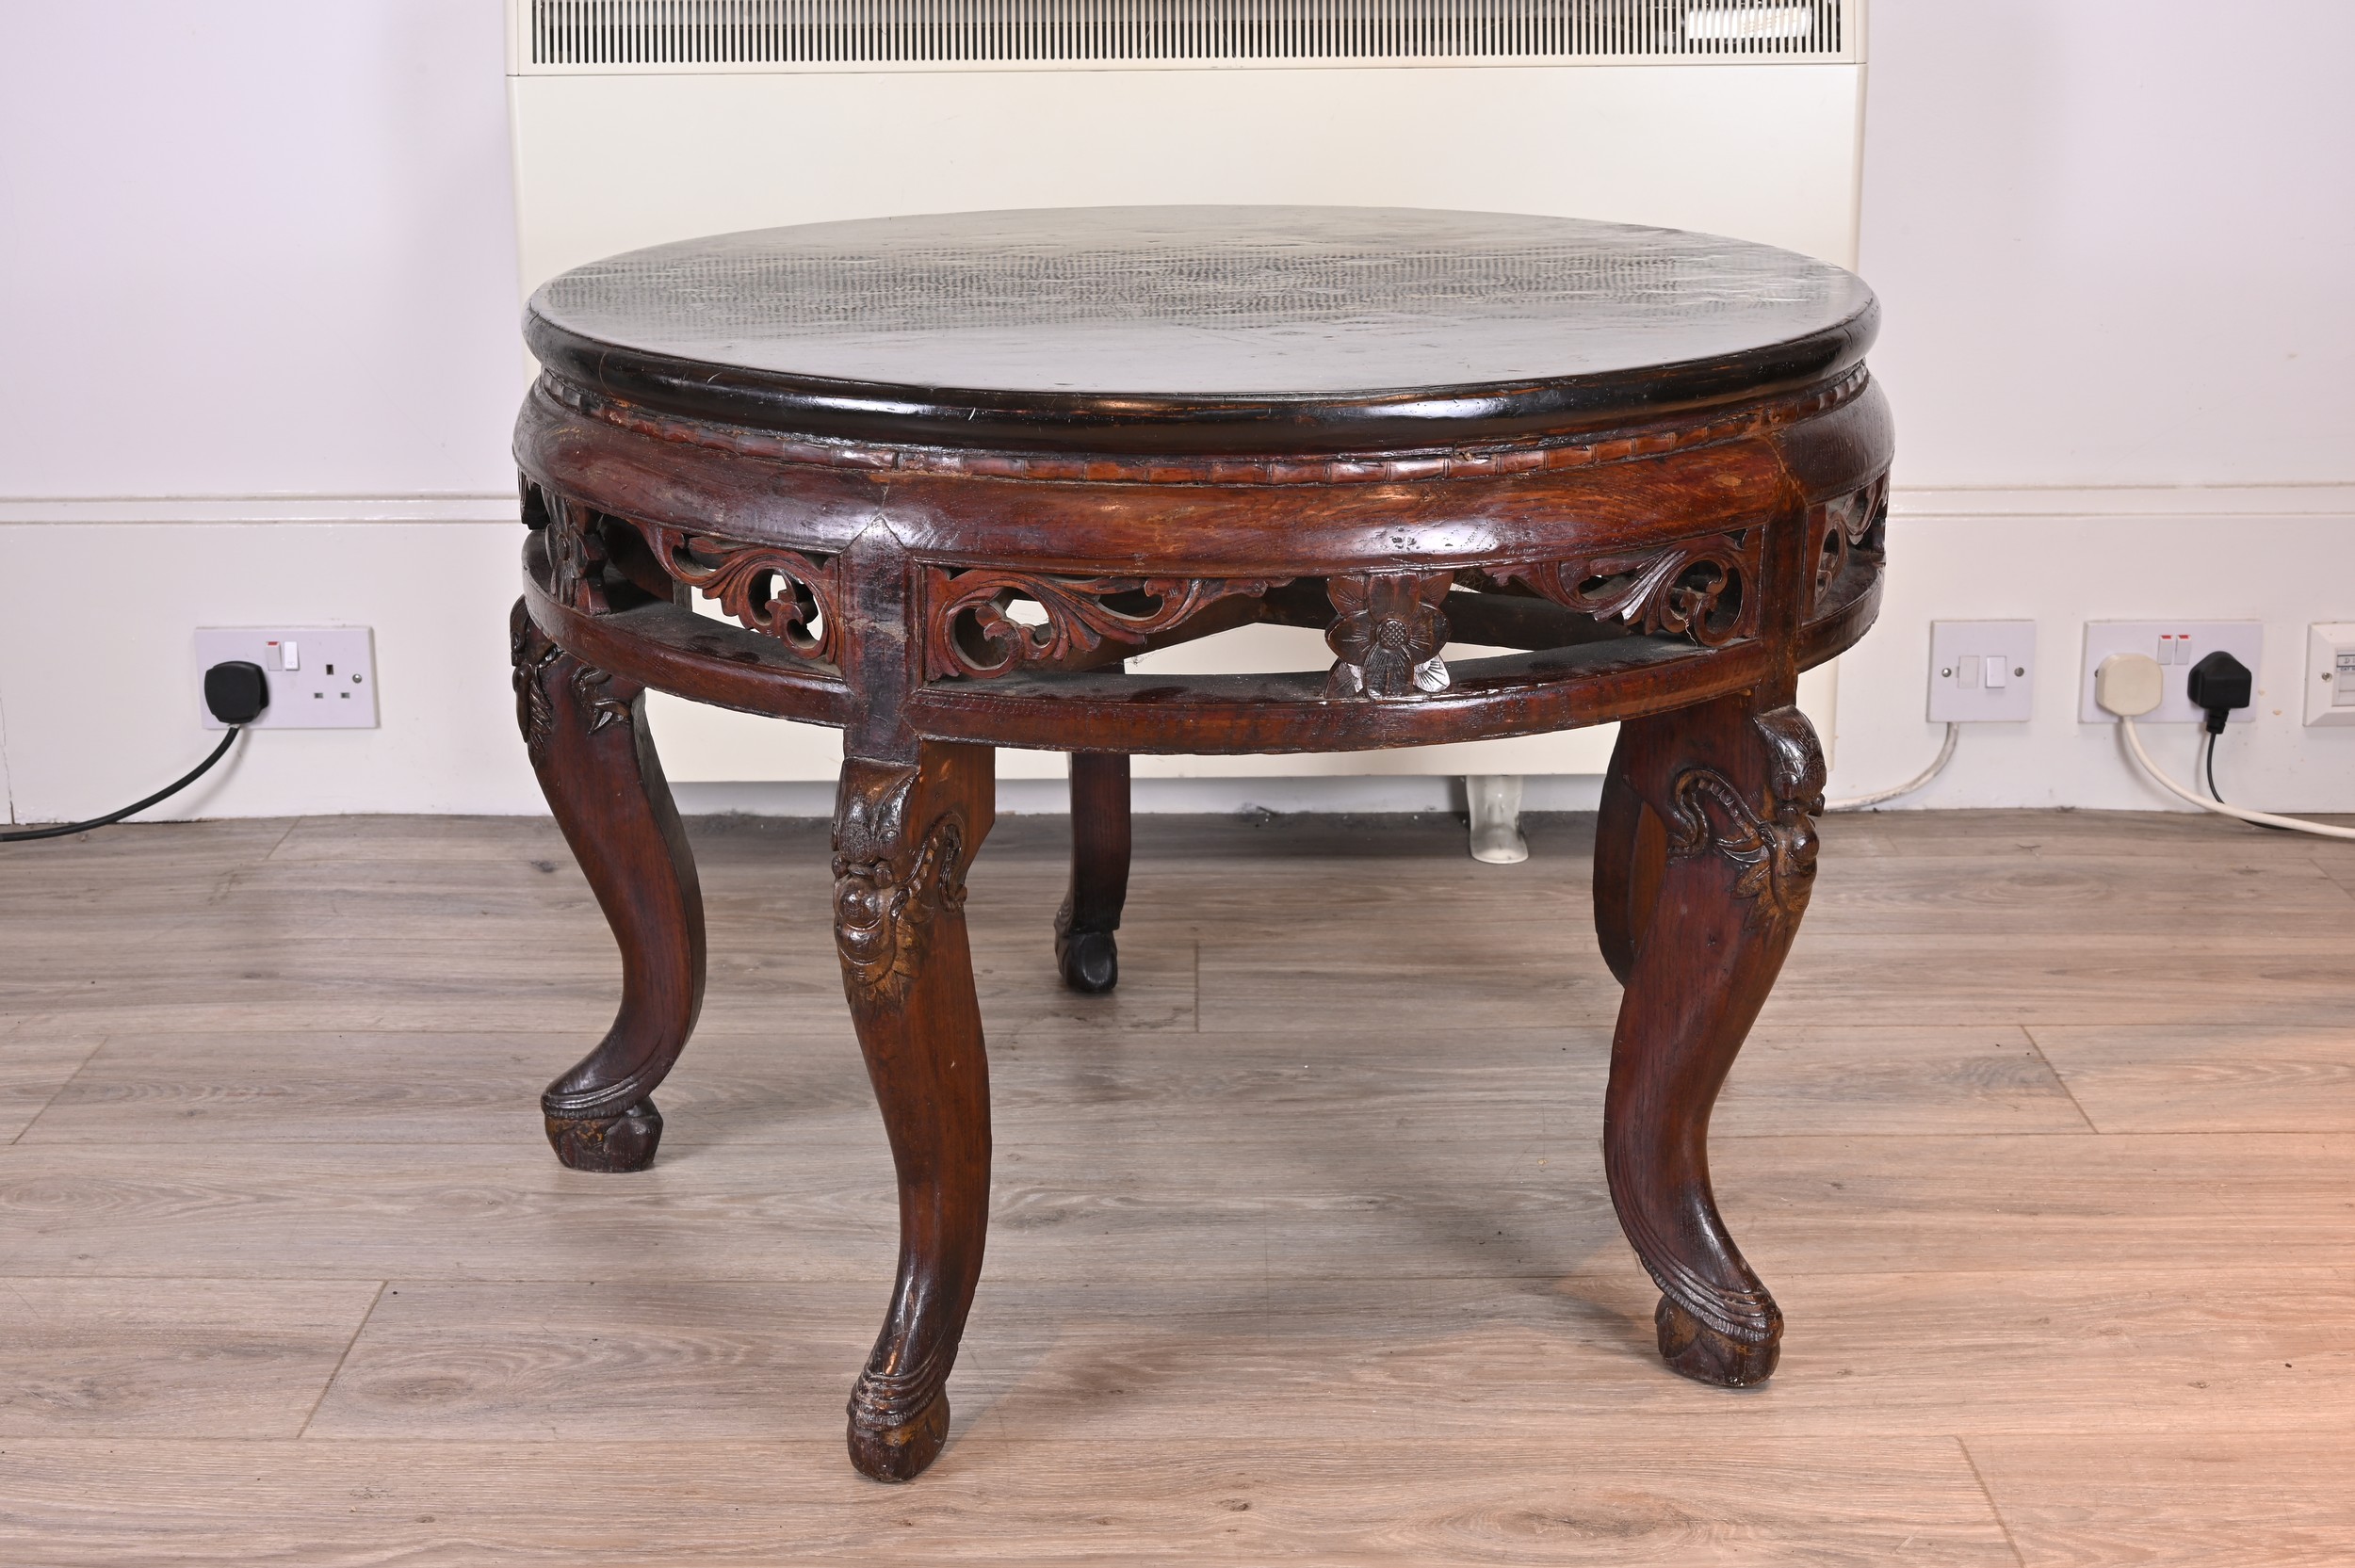 CHINESE 19TH/20TH CENTURY CIRCULAR HARDWOOD LOW TABLE, with black lacquer top and carved floral